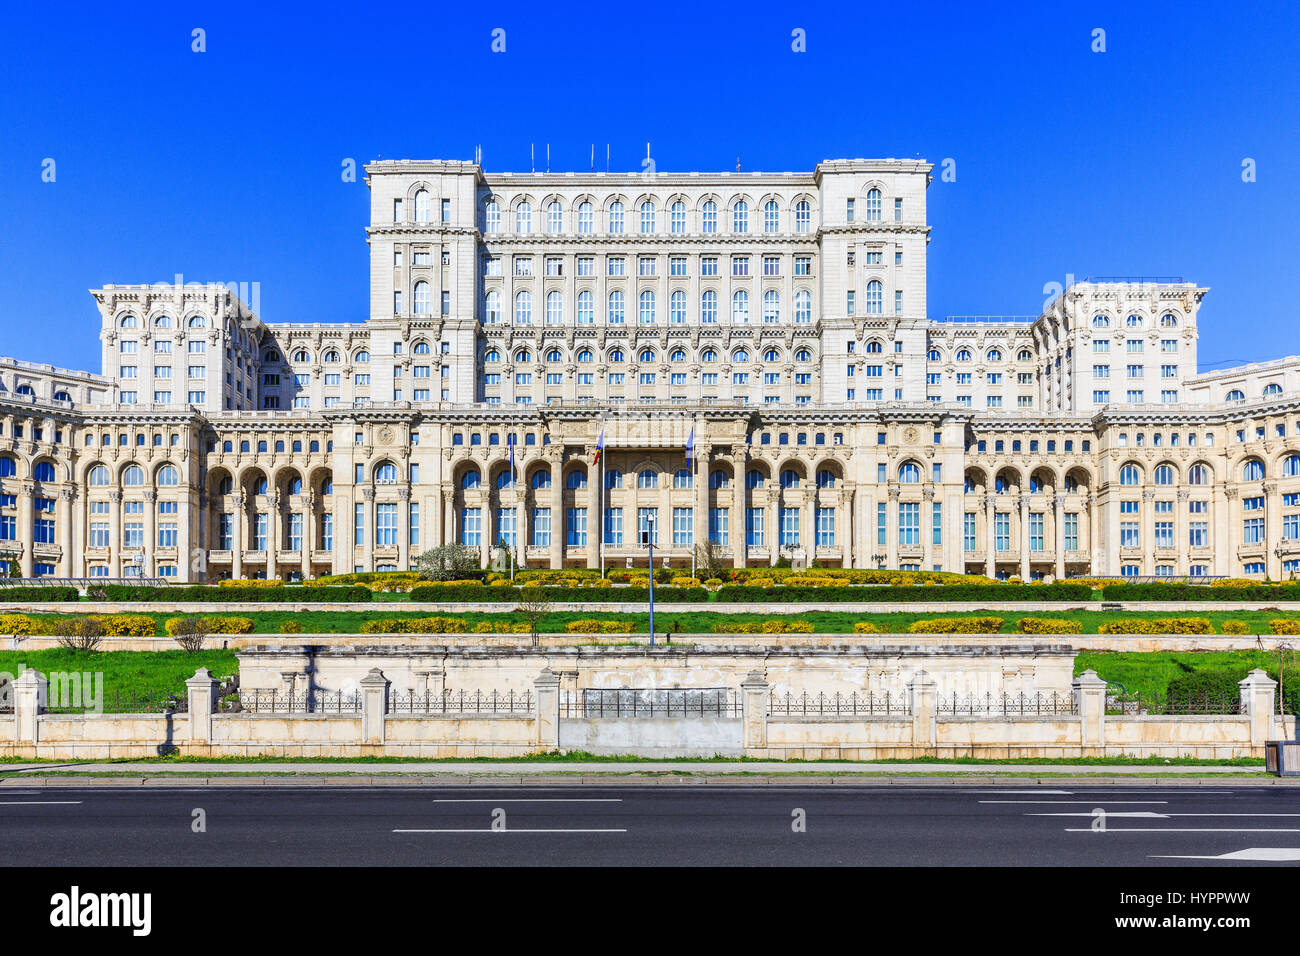 Bucharest, Romania. The Palace of the Parliament. The second largest building in the world. Stock Photo